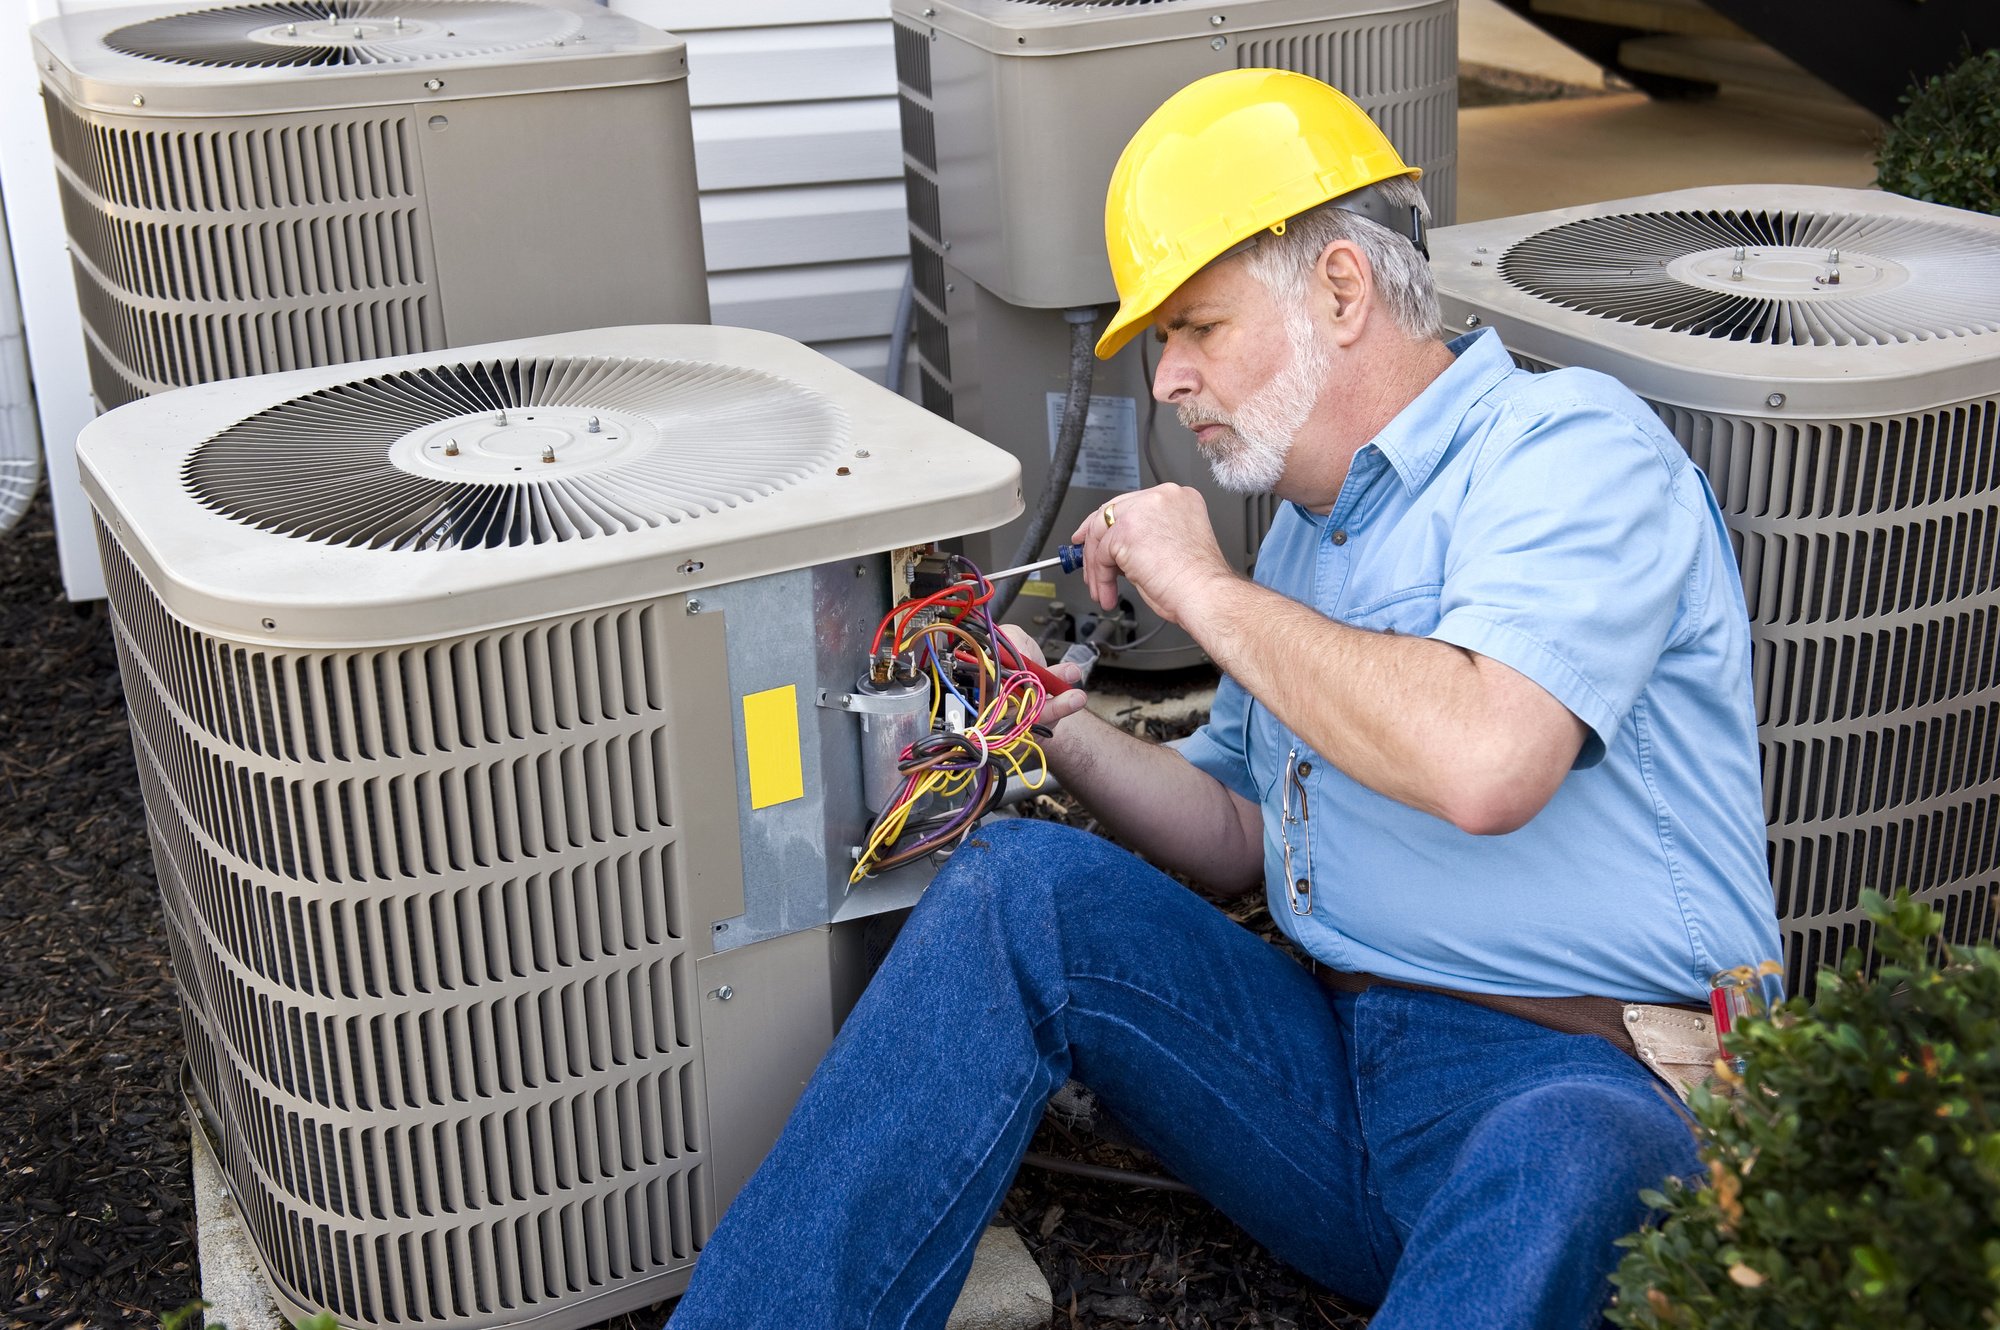 Find the best commercial HVAC contractors by identifying the top qualities to look for. Learn about the key factors that make a contractor reliable.